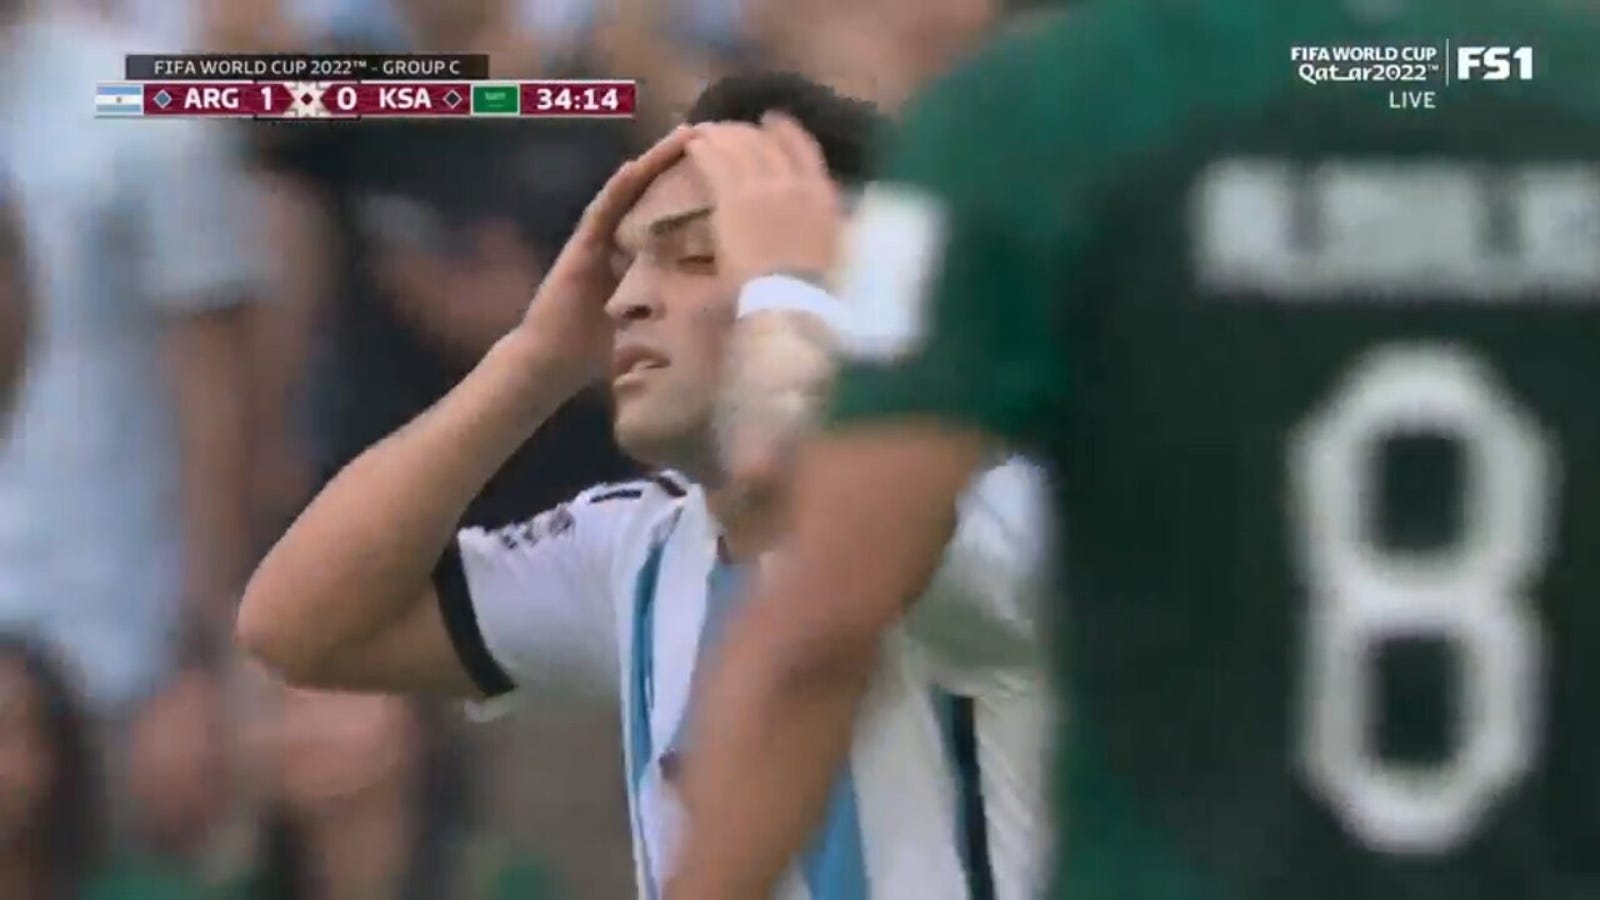 Argentina was caught offside a total of seven times in the first half against Saudi Arabia